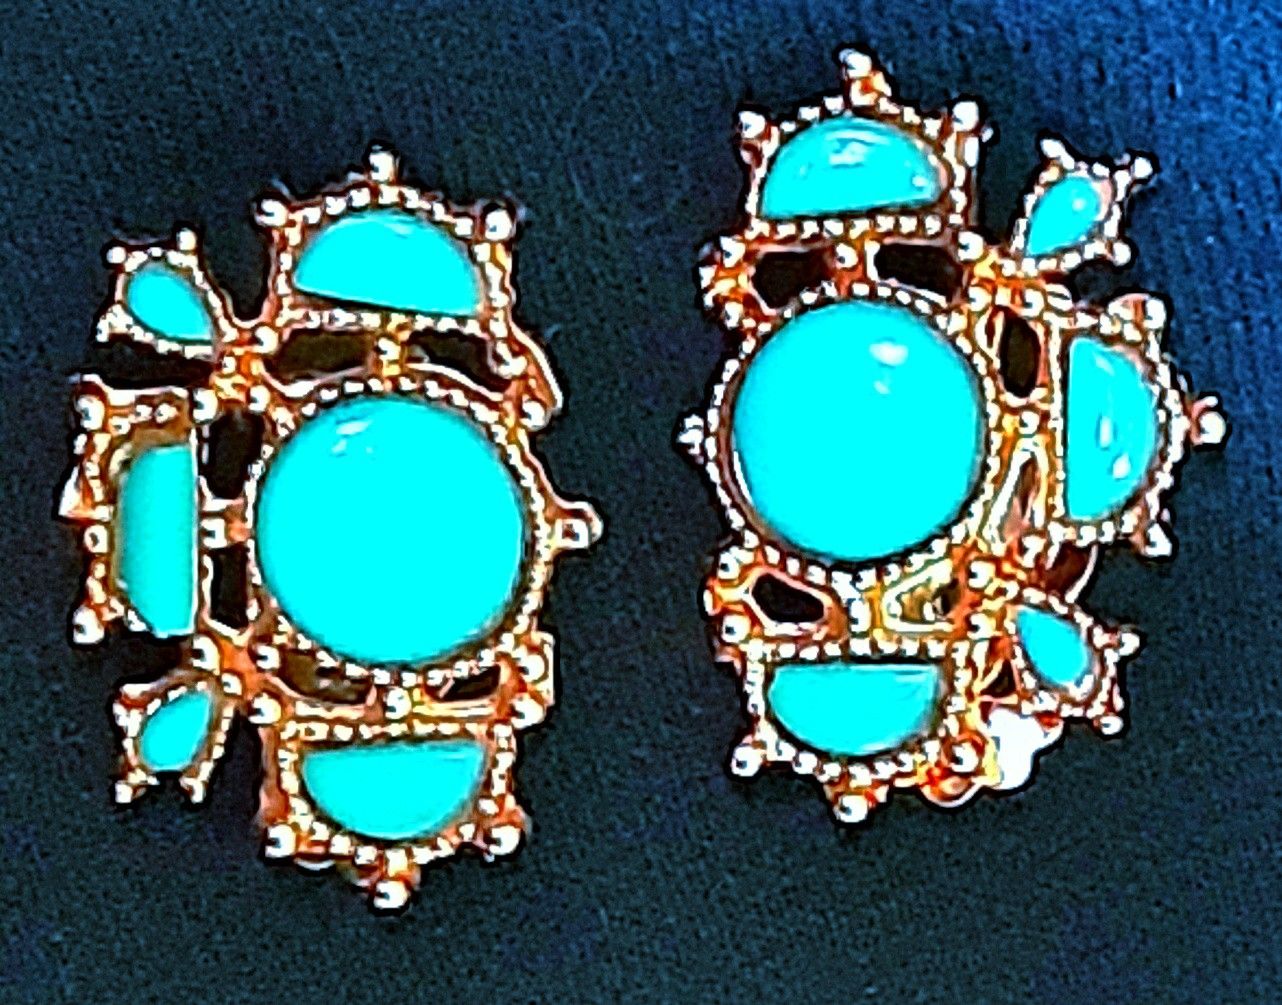 Shiny copper finished clip on earrings with thermoset turquoise plastic stones